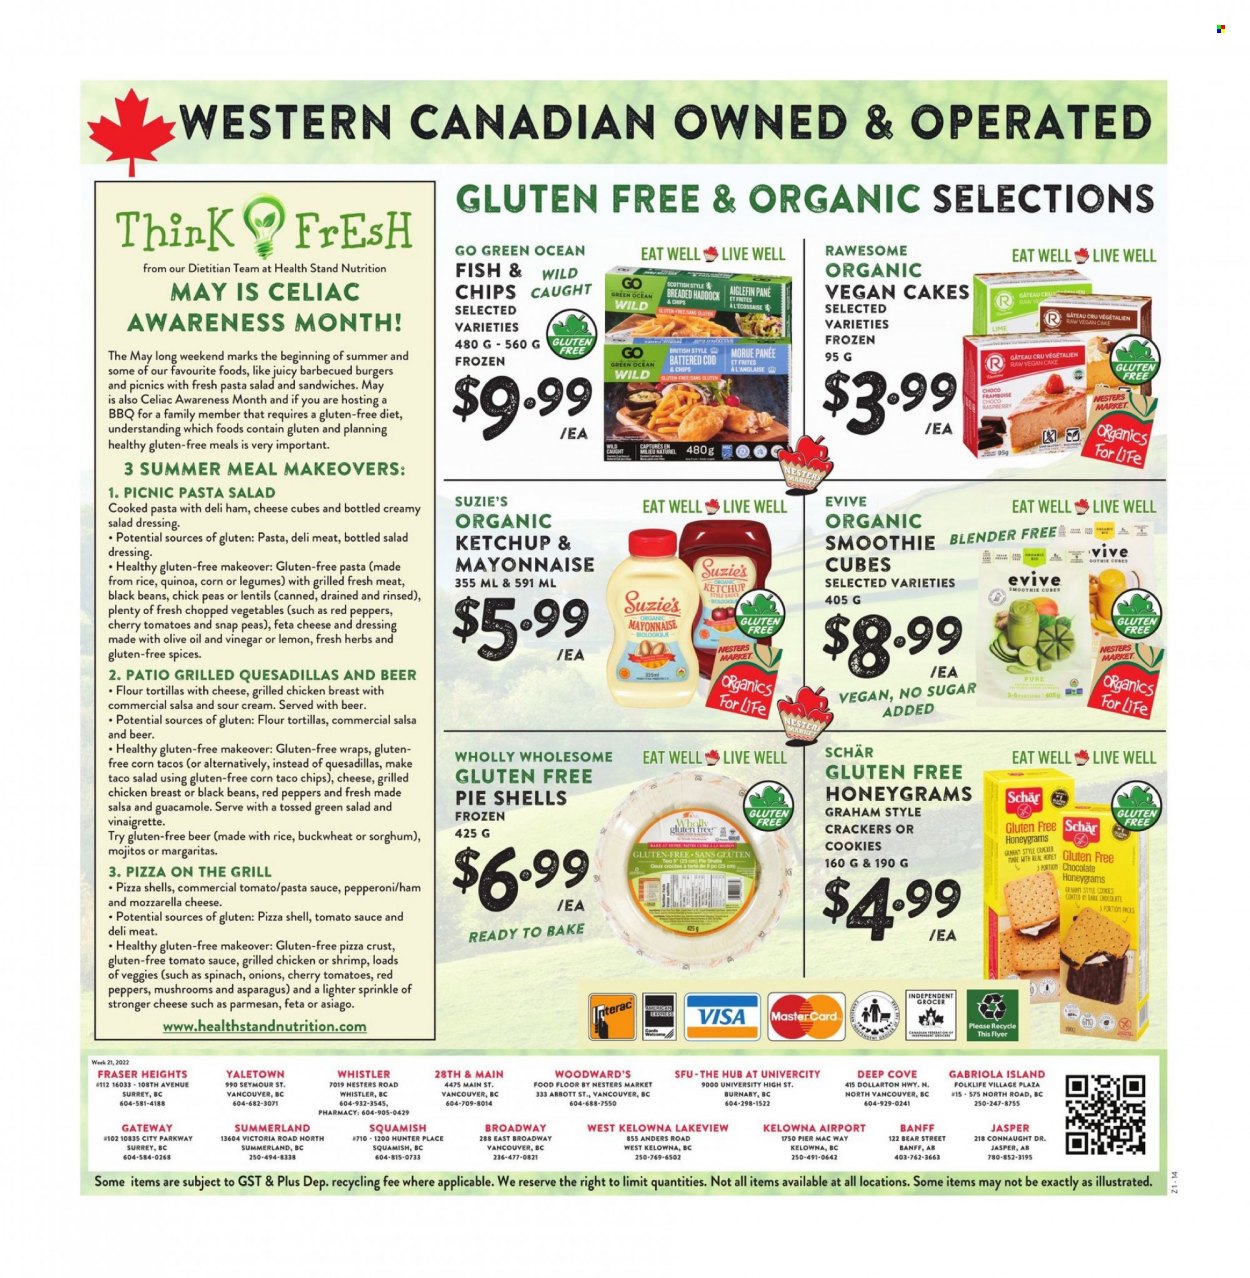 thumbnail - Nesters Food Market Flyer - May 15, 2022 - May 21, 2022 - Sales products - tortillas, cake, tacos, flour tortillas, wraps, asparagus, beans, corn, salad greens, snap peas, tomatoes, onion, red peppers, diced vegetables, haddock, fish, pizza, pasta sauce, sandwich, hamburger, chicken breasts, guacamole, pasta salad, asiago, parmesan, feta, frozen vegetables, chocolate, crackers, pie crust, black beans, lentils, tomato sauce, buckwheat, quinoa, chickpeas, spice, salad dressing, ketchup, dressing, salsa, alcohol, beer, Plenty. Page 12.